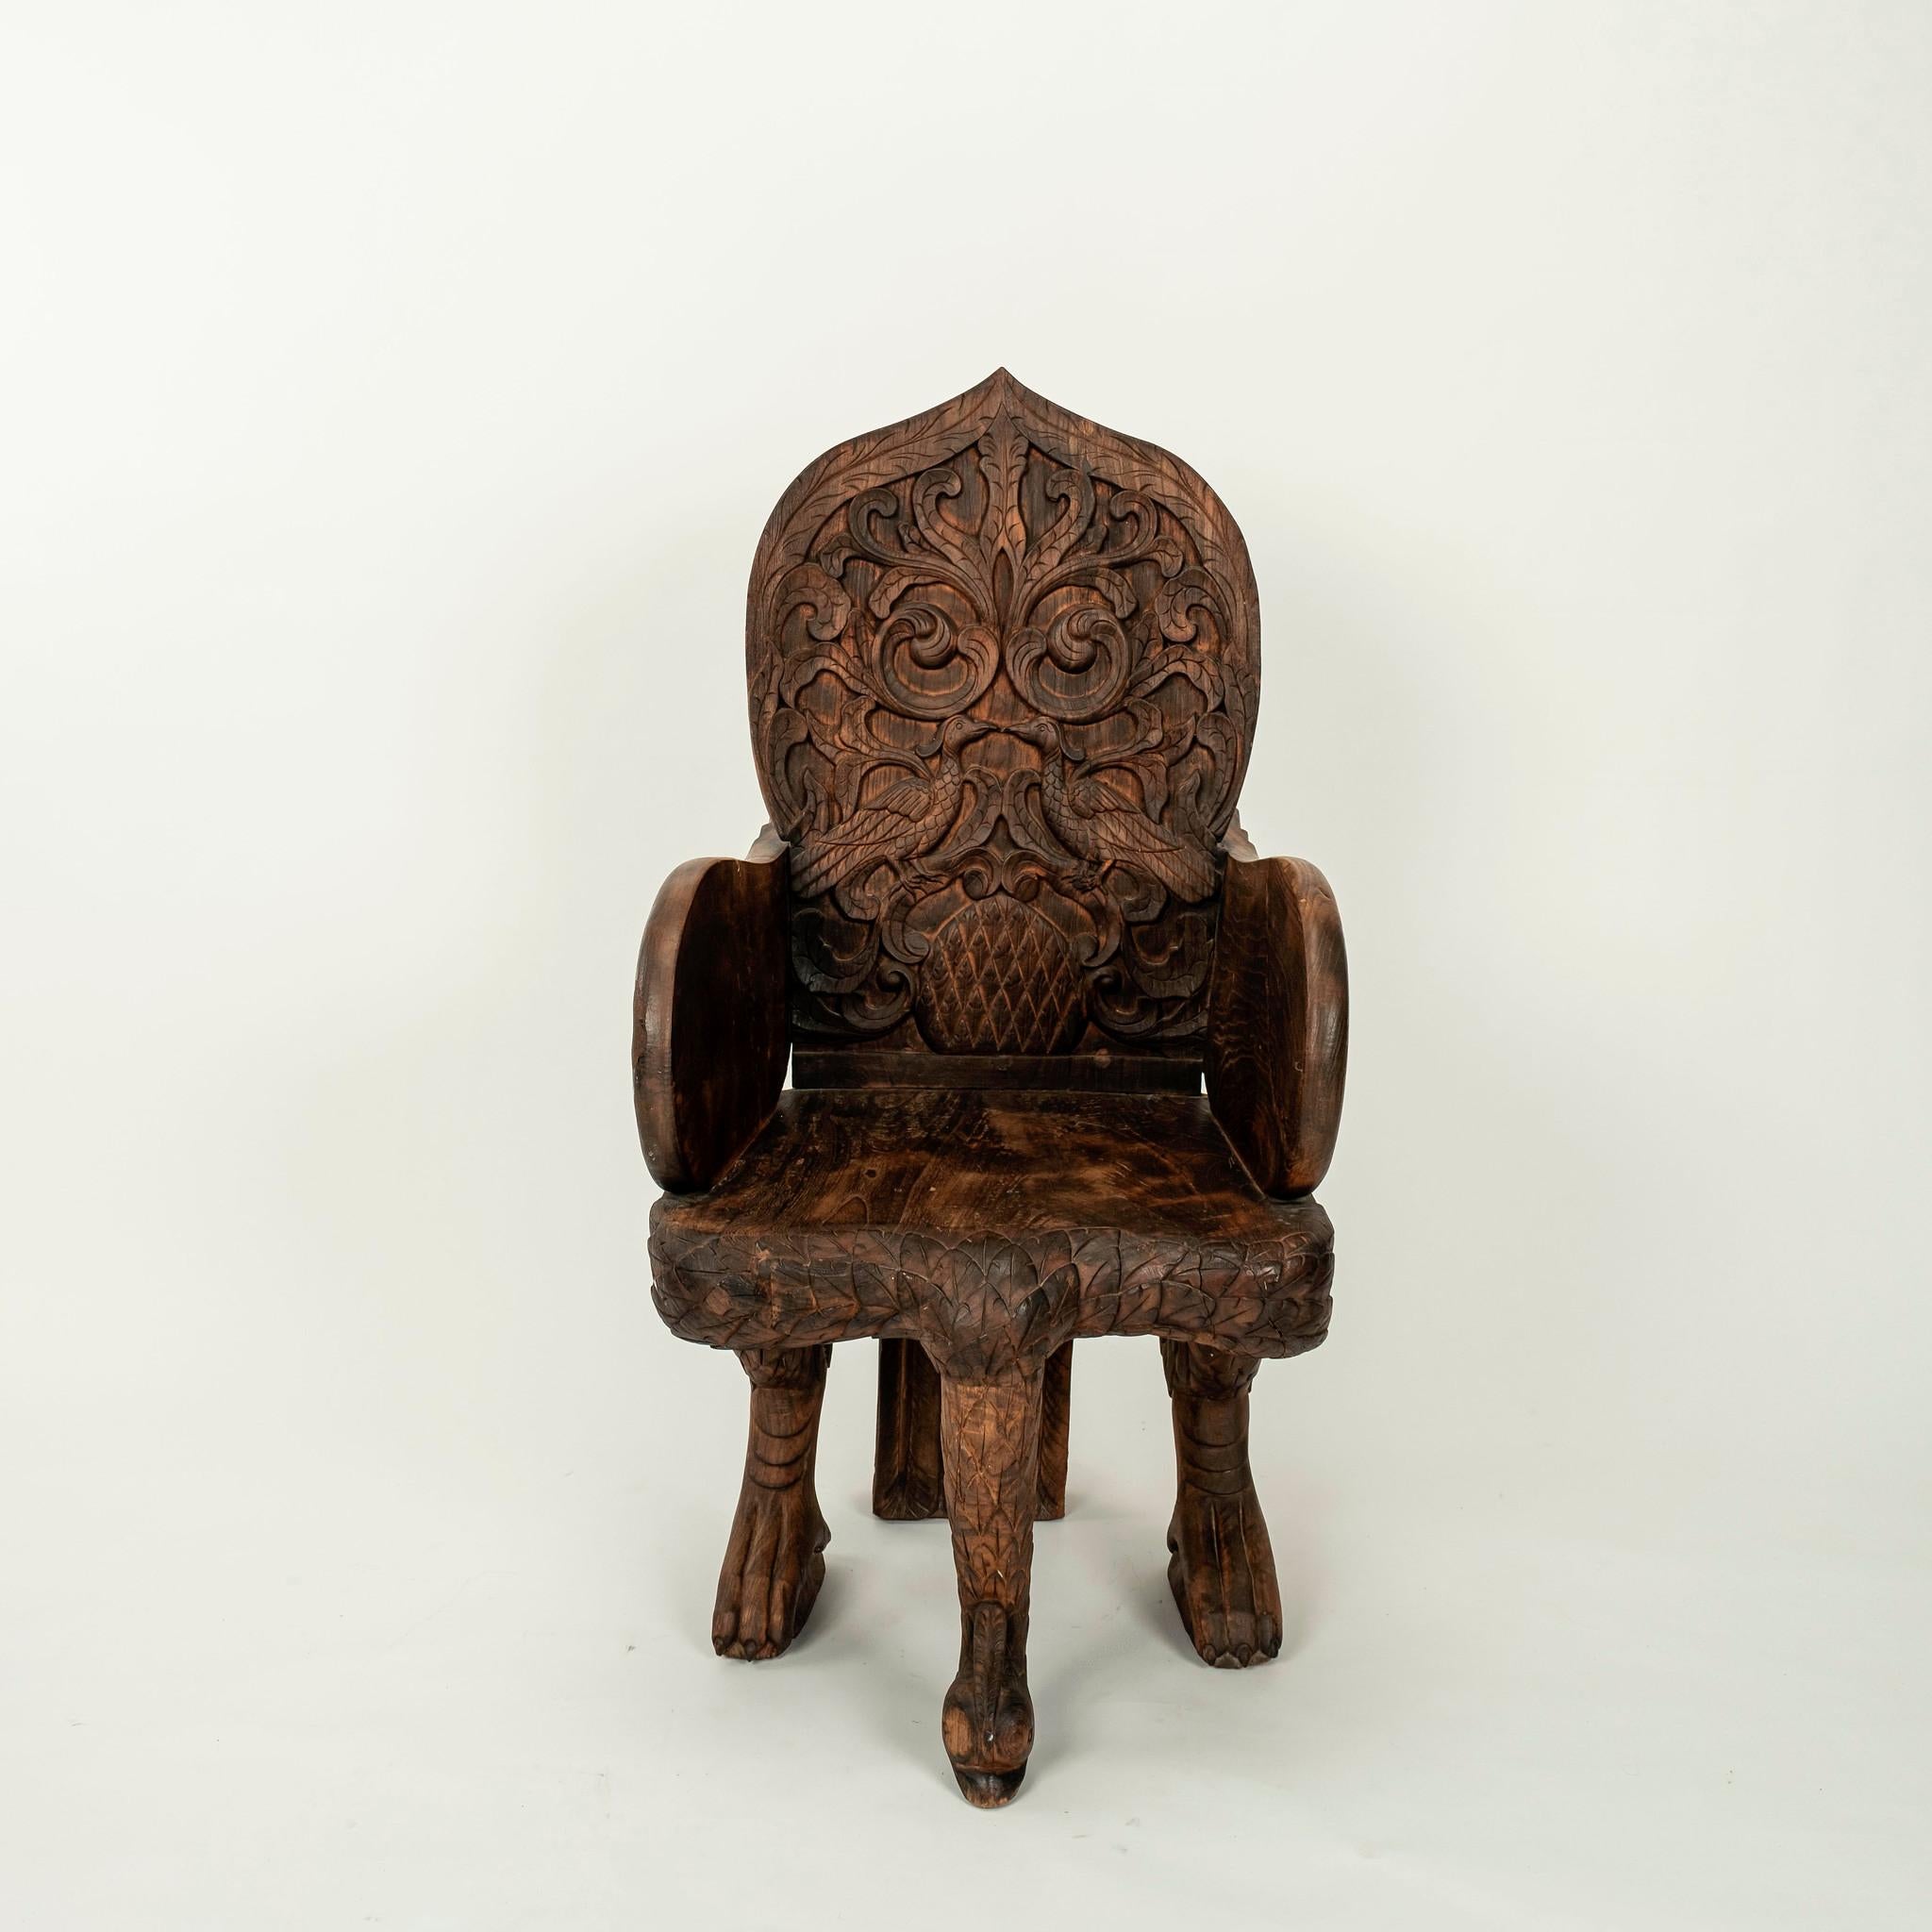 Mid 20th century hand carved peacock chair.